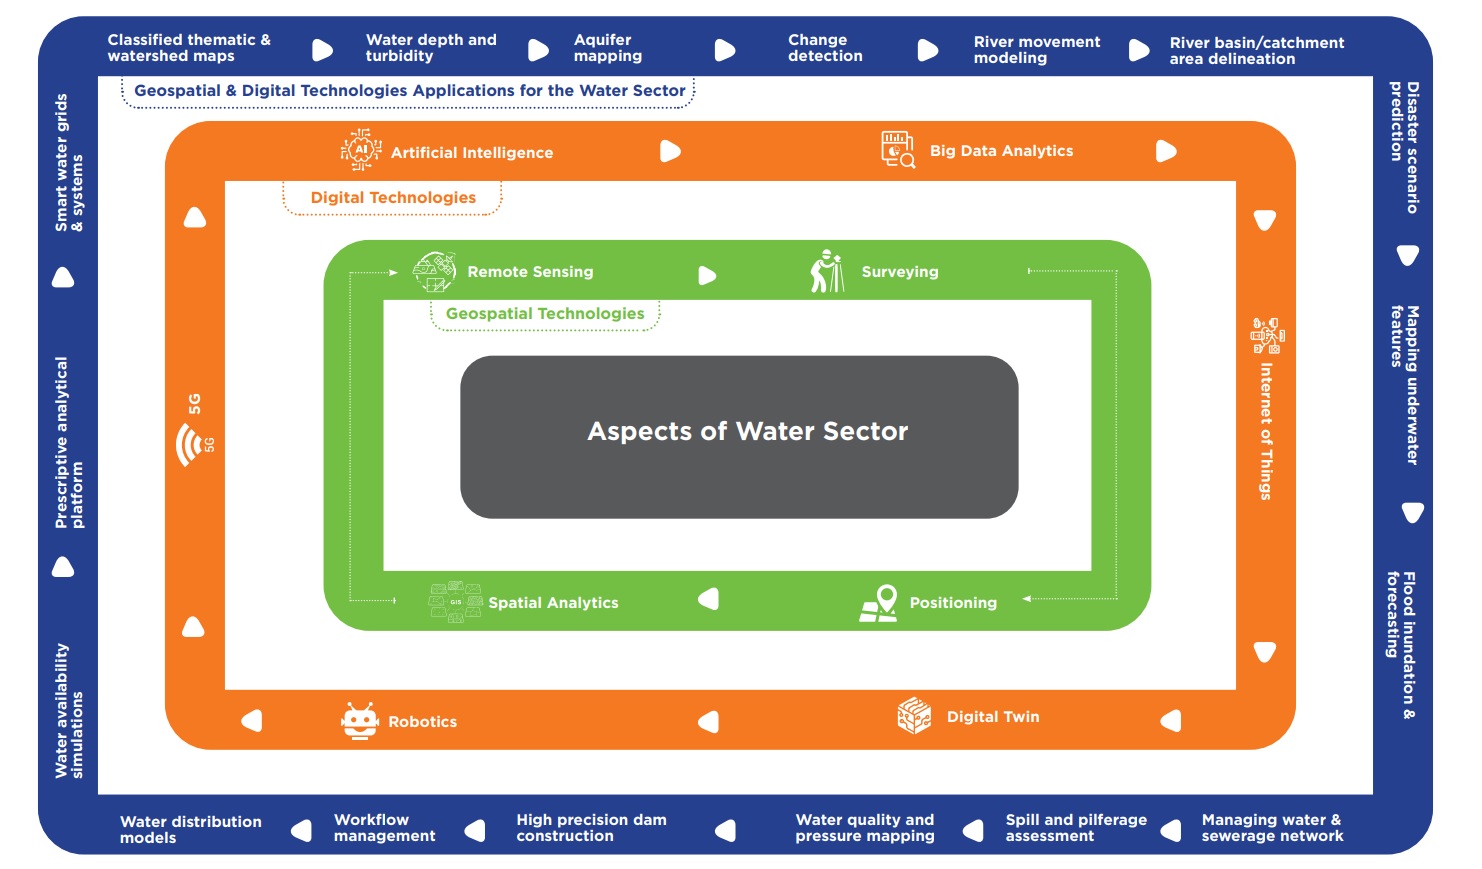 Aspects-of-water-sector